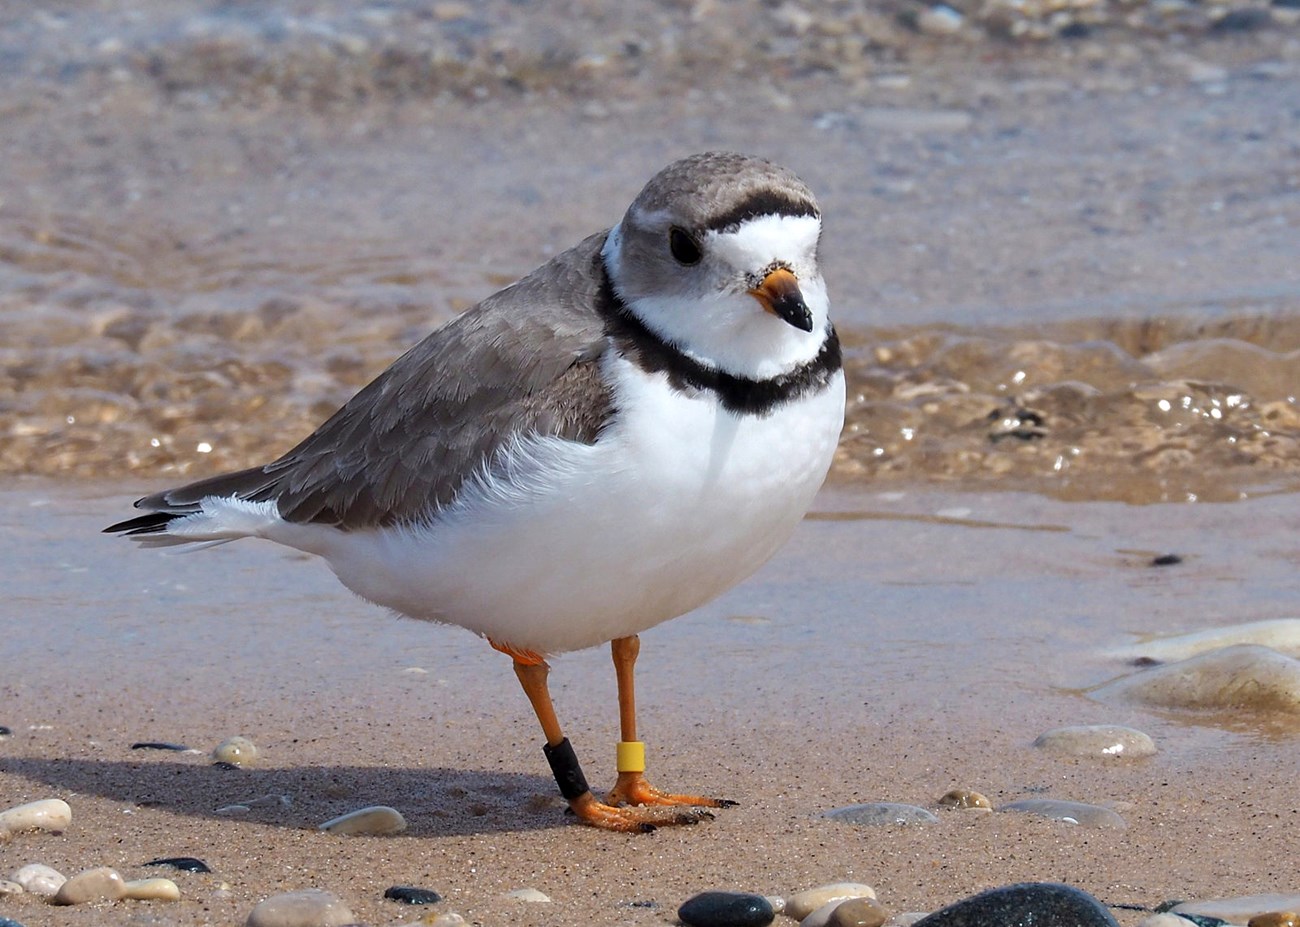 Adult plover on cobbled beach